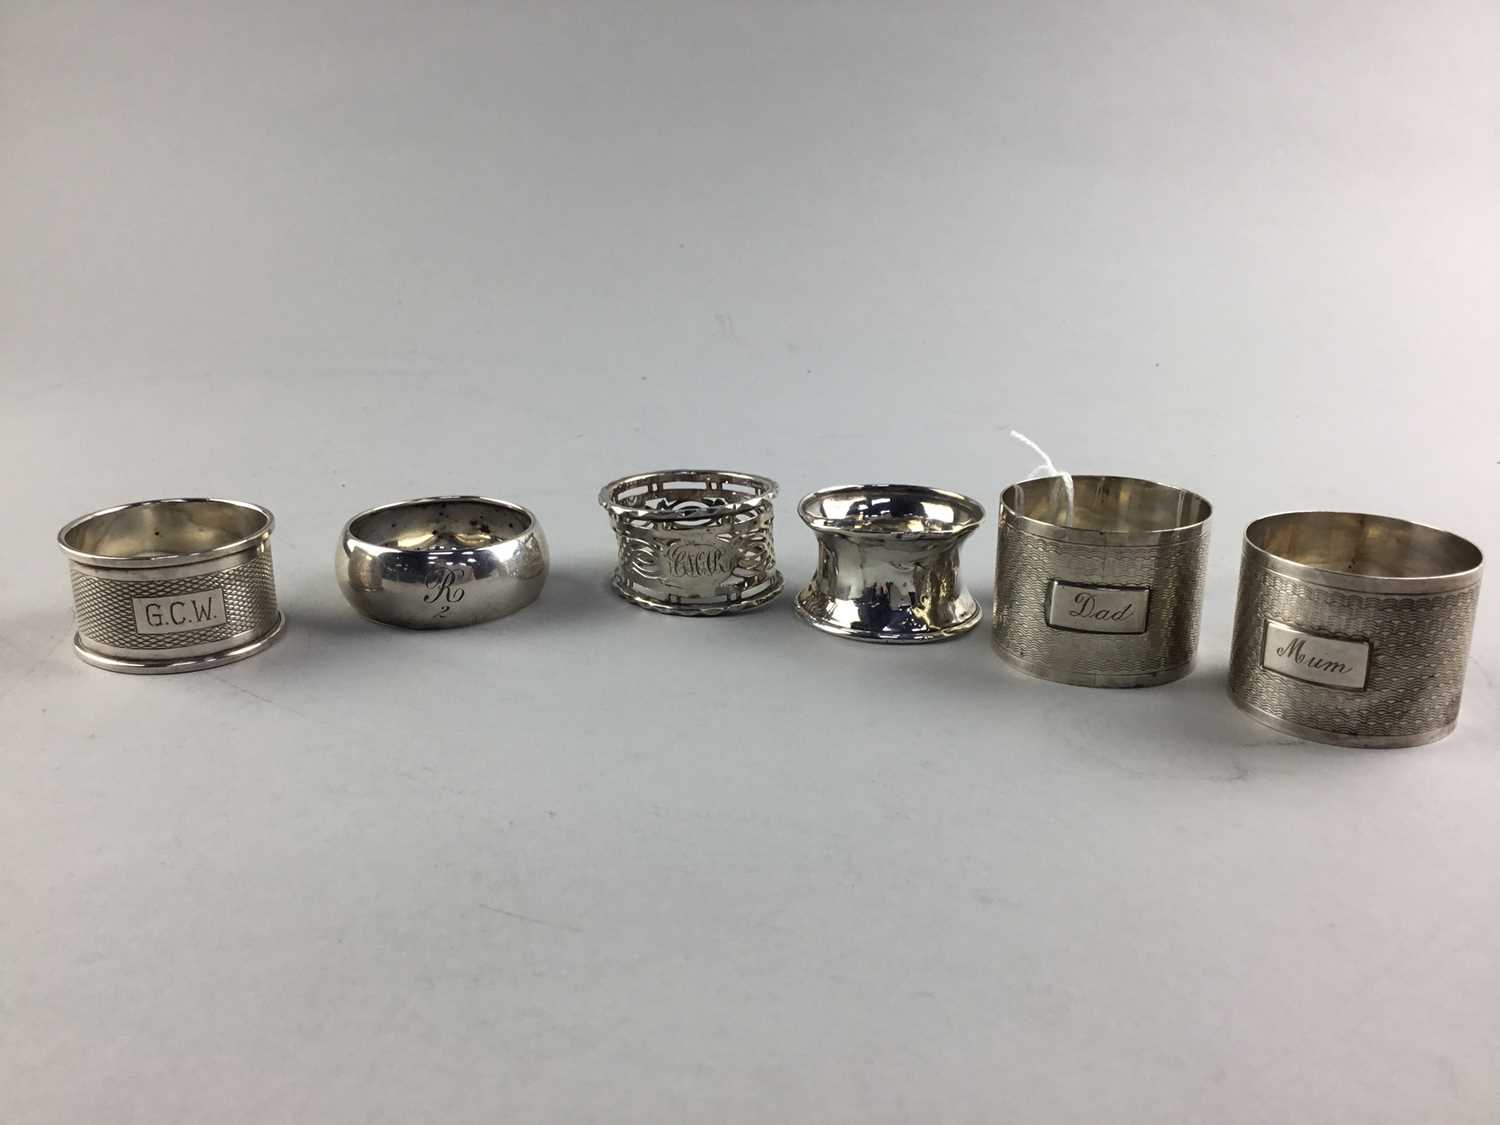 Lot 74 - A PAIR OF EARLY 20TH CENTURY SILVER ENGINE TURNED NAPKIN RINGS AND FOUR OTHER NAPKIN RINGS